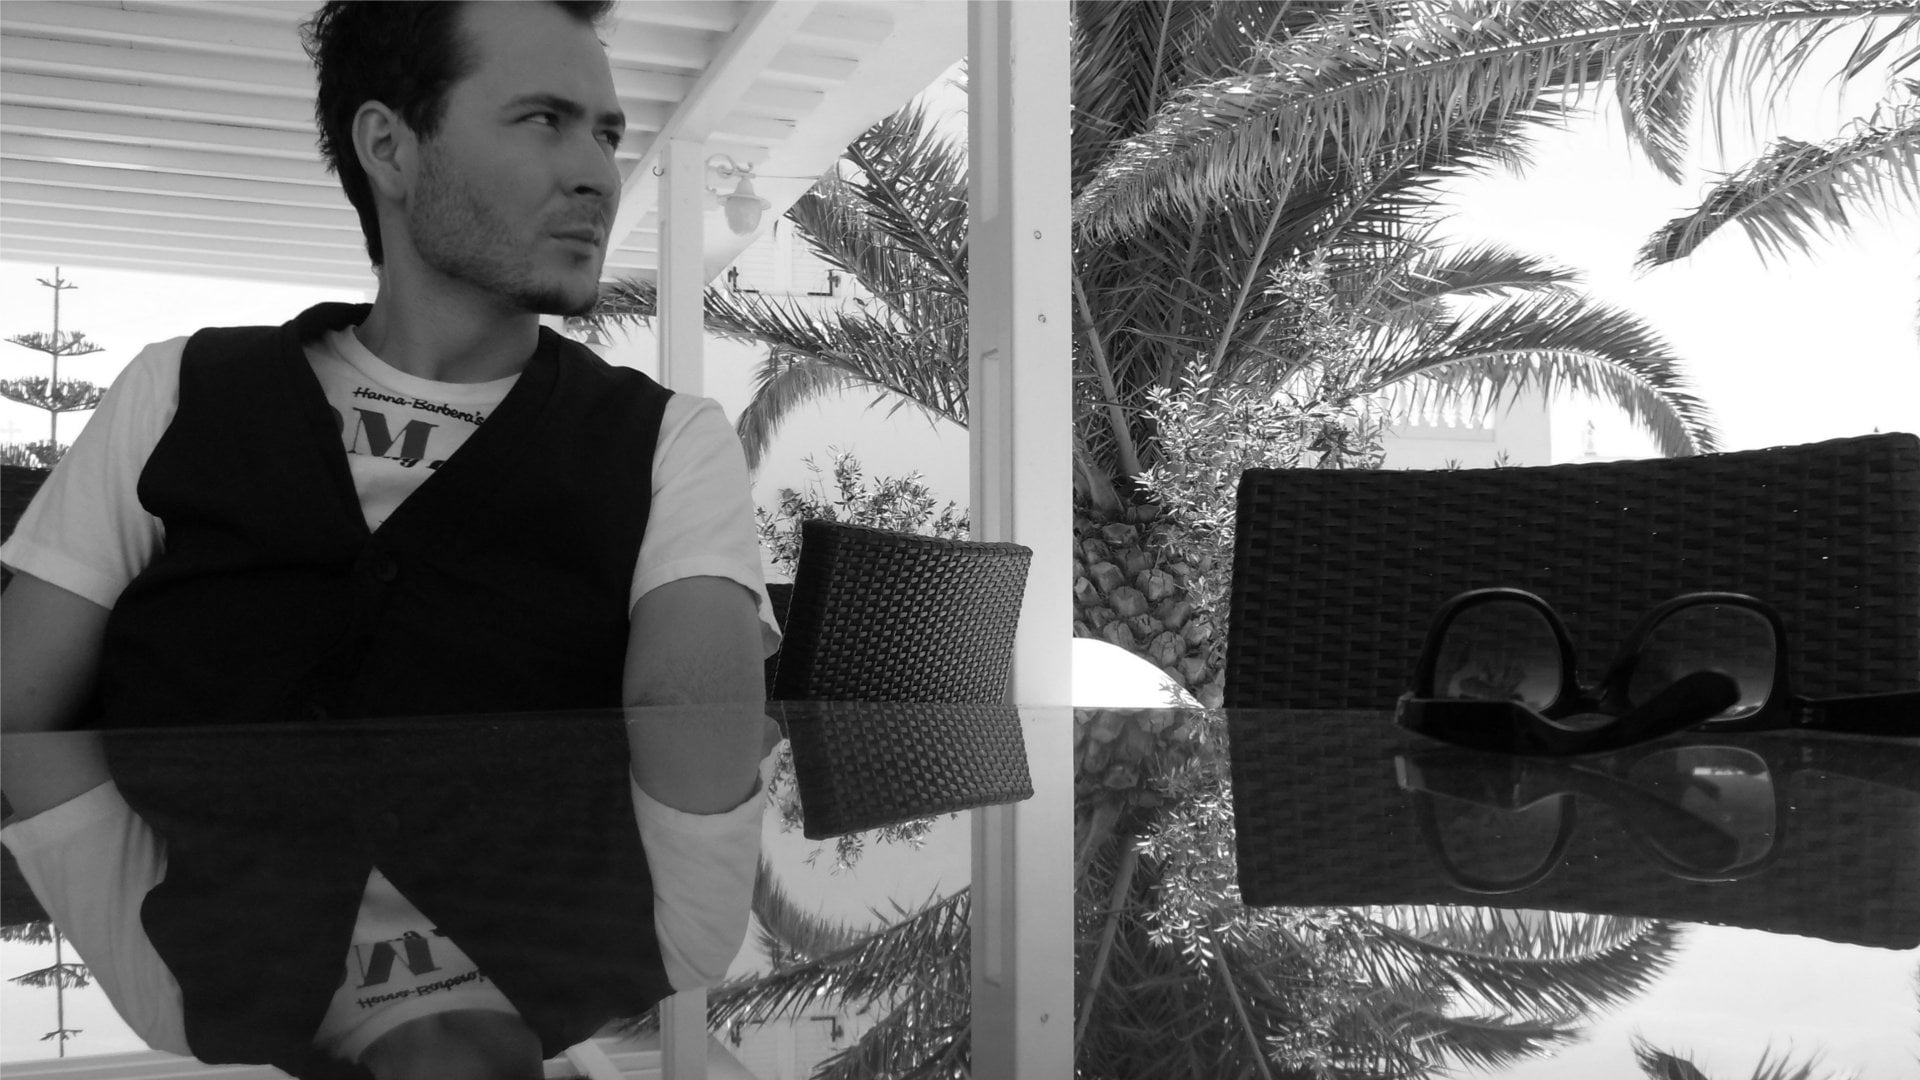 Grayscale photo of man in shirt and vest sitting in front of glass ...